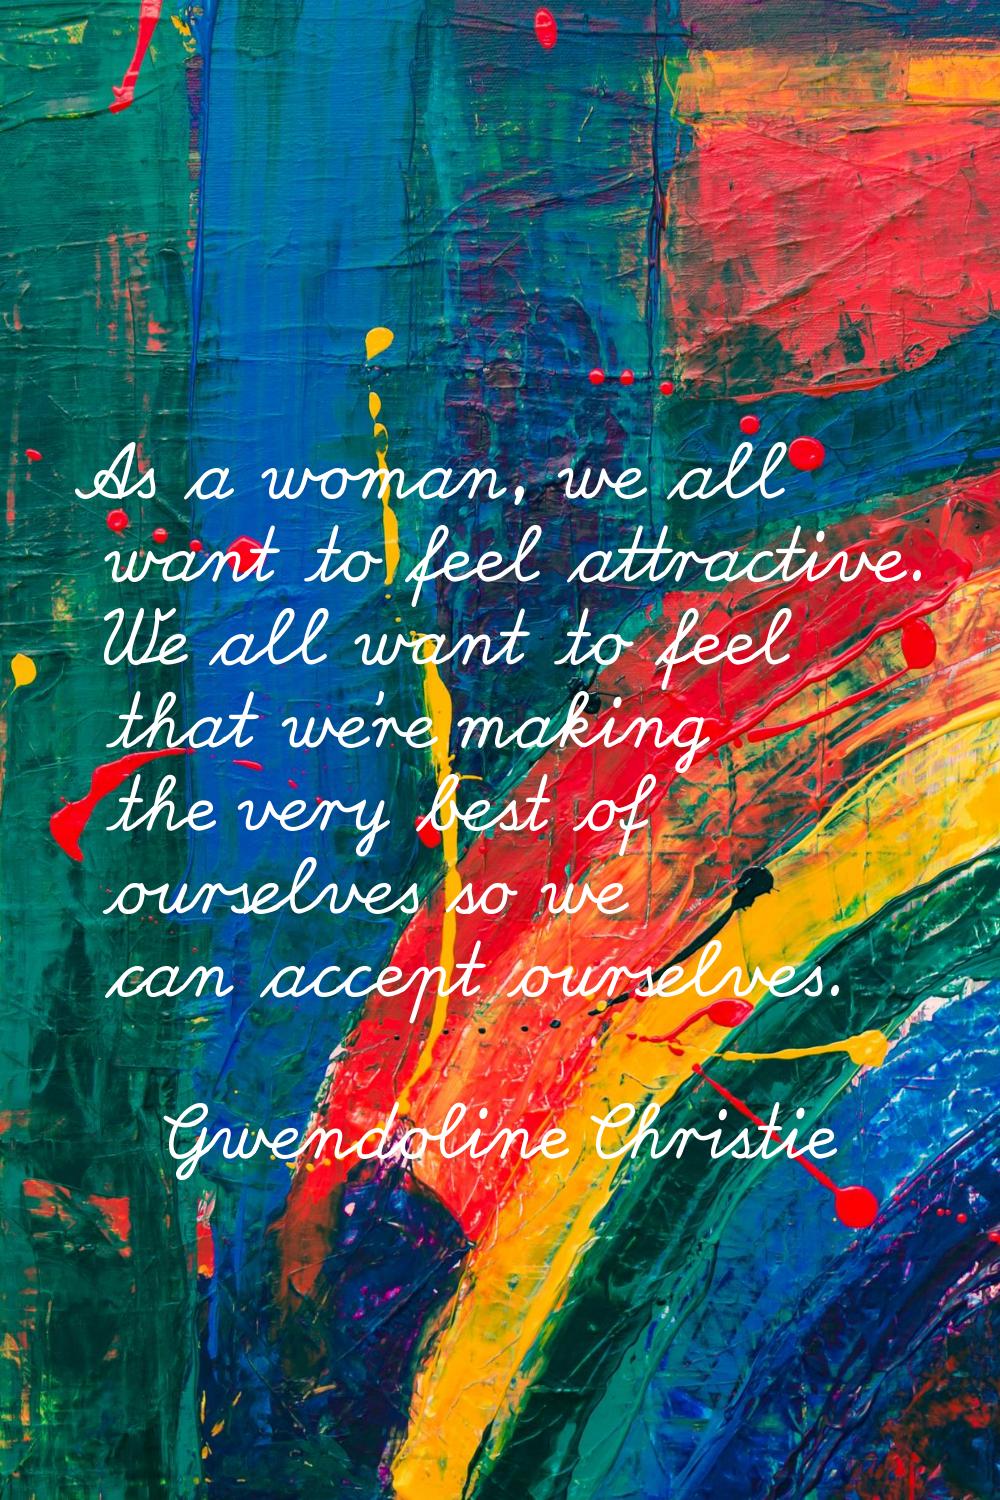 As a woman, we all want to feel attractive. We all want to feel that we're making the very best of 